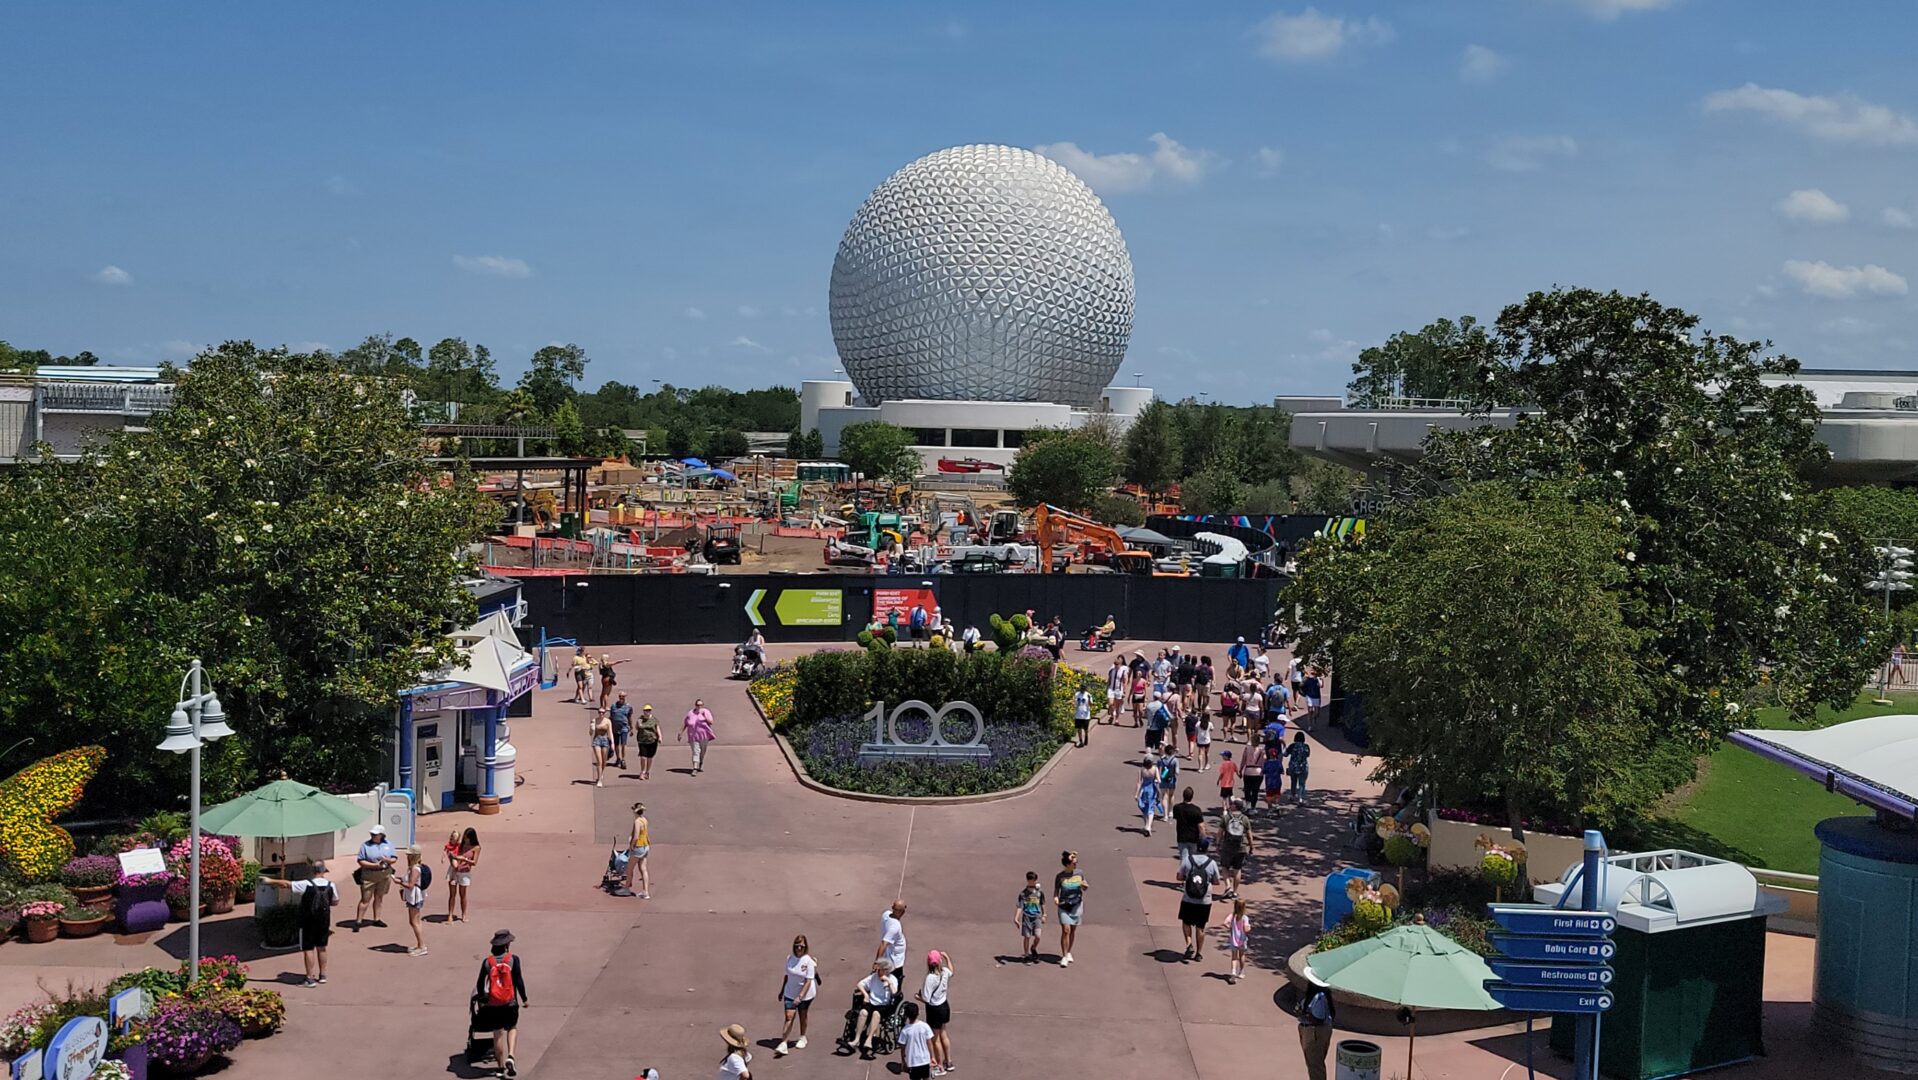 More Walls Go Up for Epcot’s CommuniCore Hall